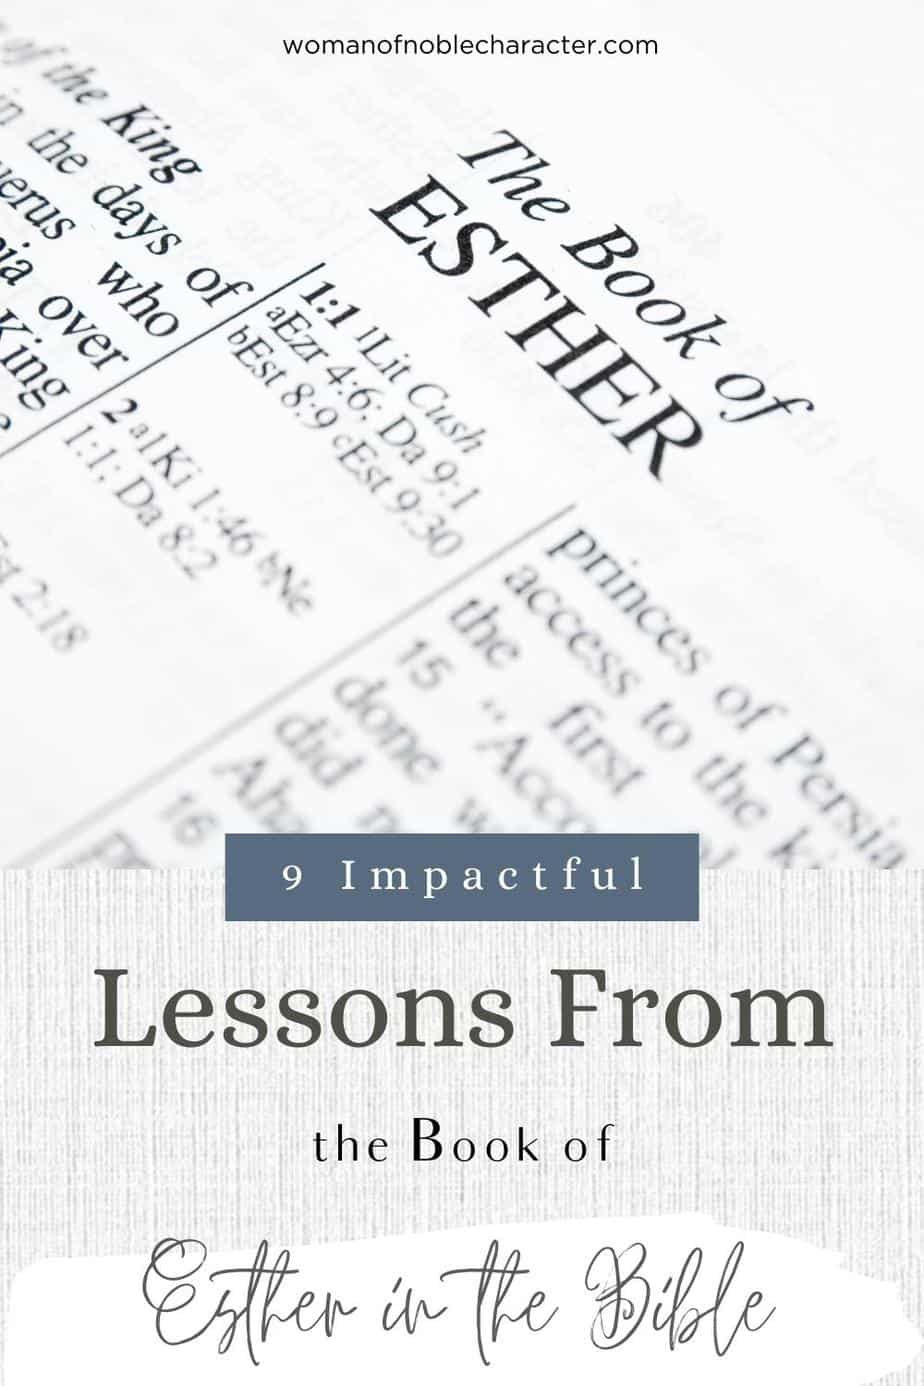 image of the book of Esther in the Bible with the text 9 Impactful Lessons We Can Learn From The Book Of Esther in the Bible